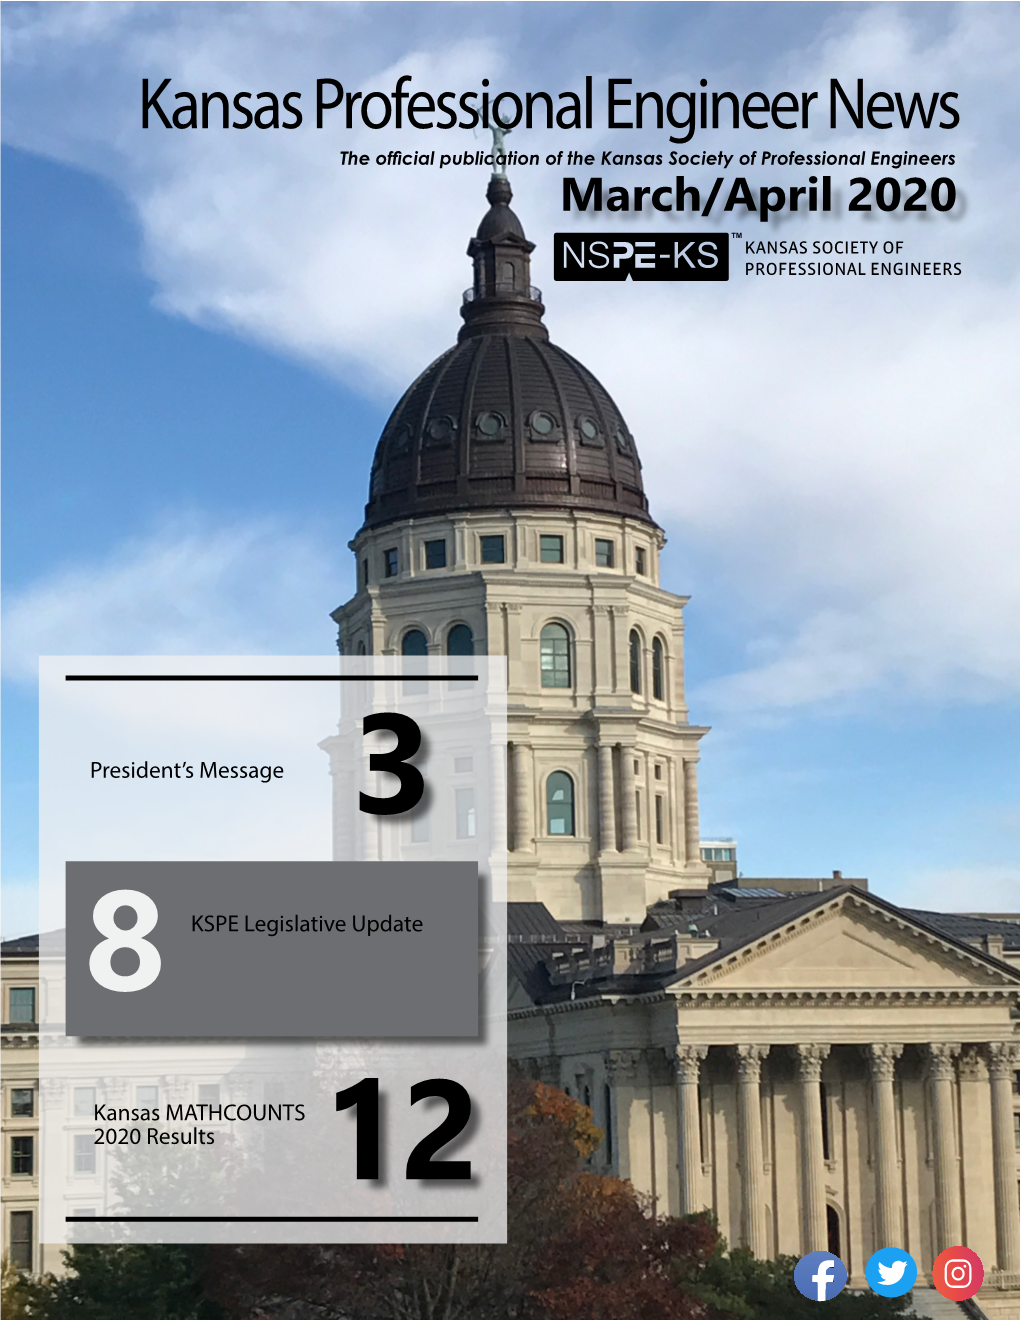 Kansas Professional Engineer News the Official Publication of the Kansas Society of Professional Engineers March/April 2020